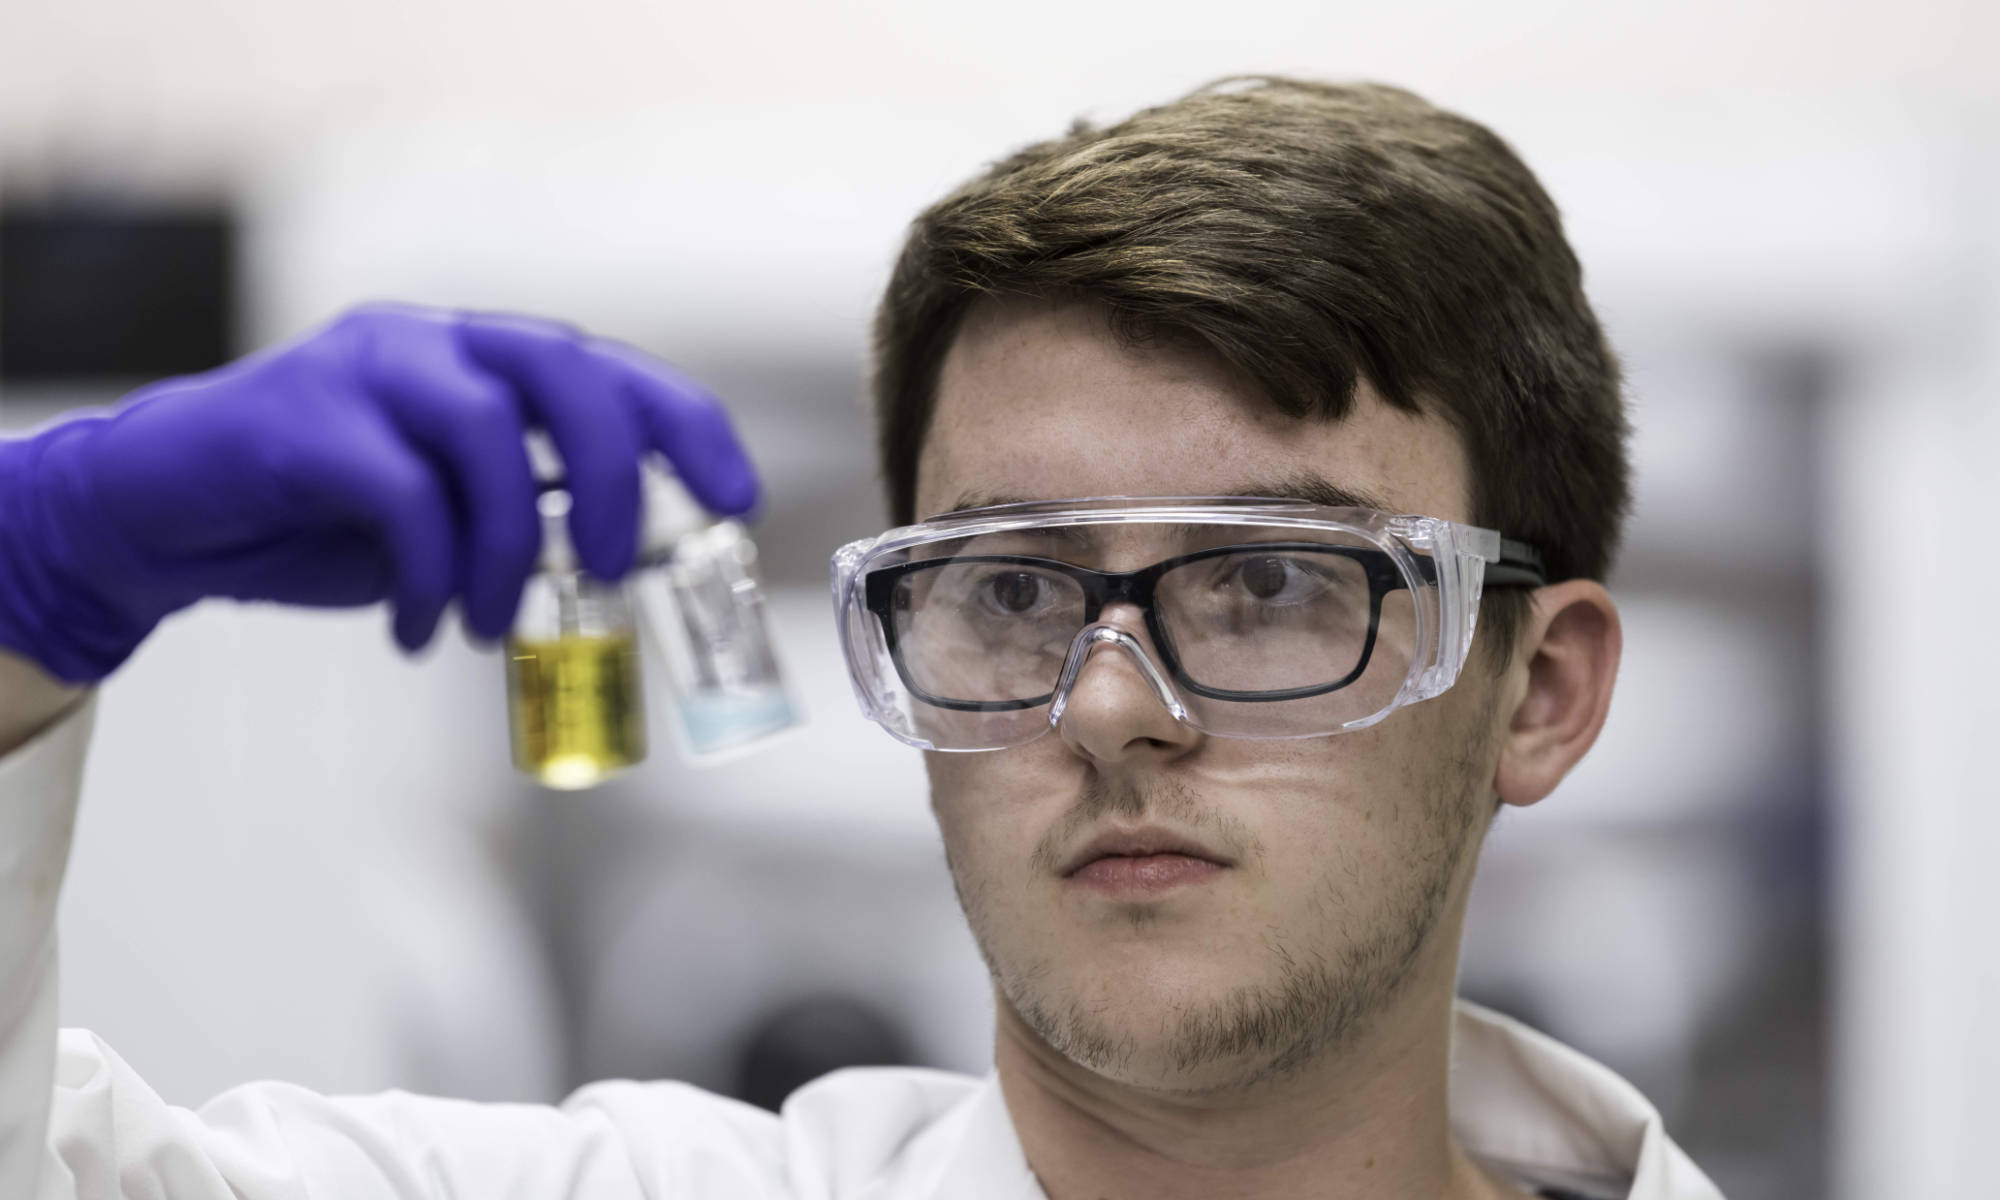 Undergraduate student in safety goggles and lab gear holds two vials of semiconducting nanoparticles with his gloved hand.